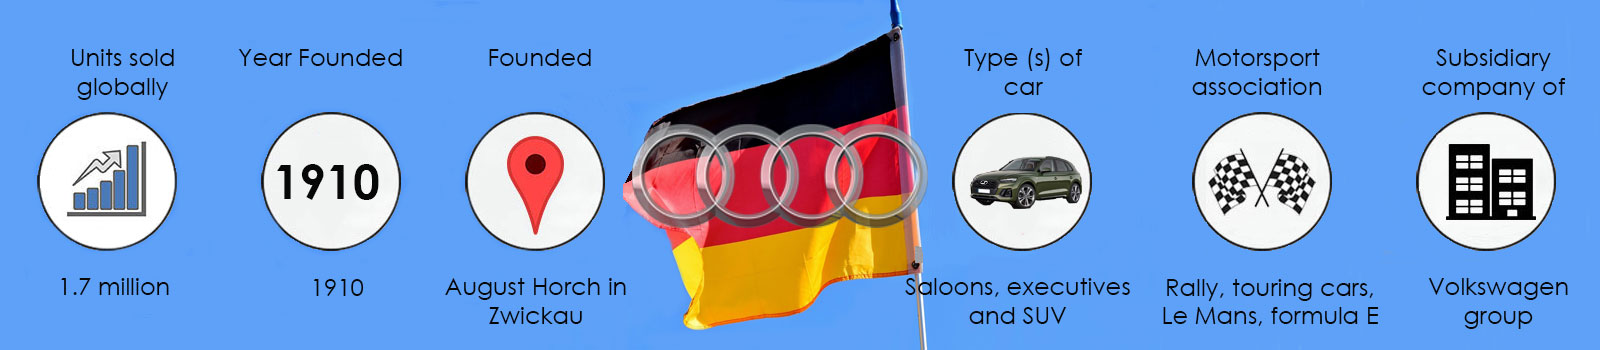 The history of Audi infographic showing sales, founding information and car facts